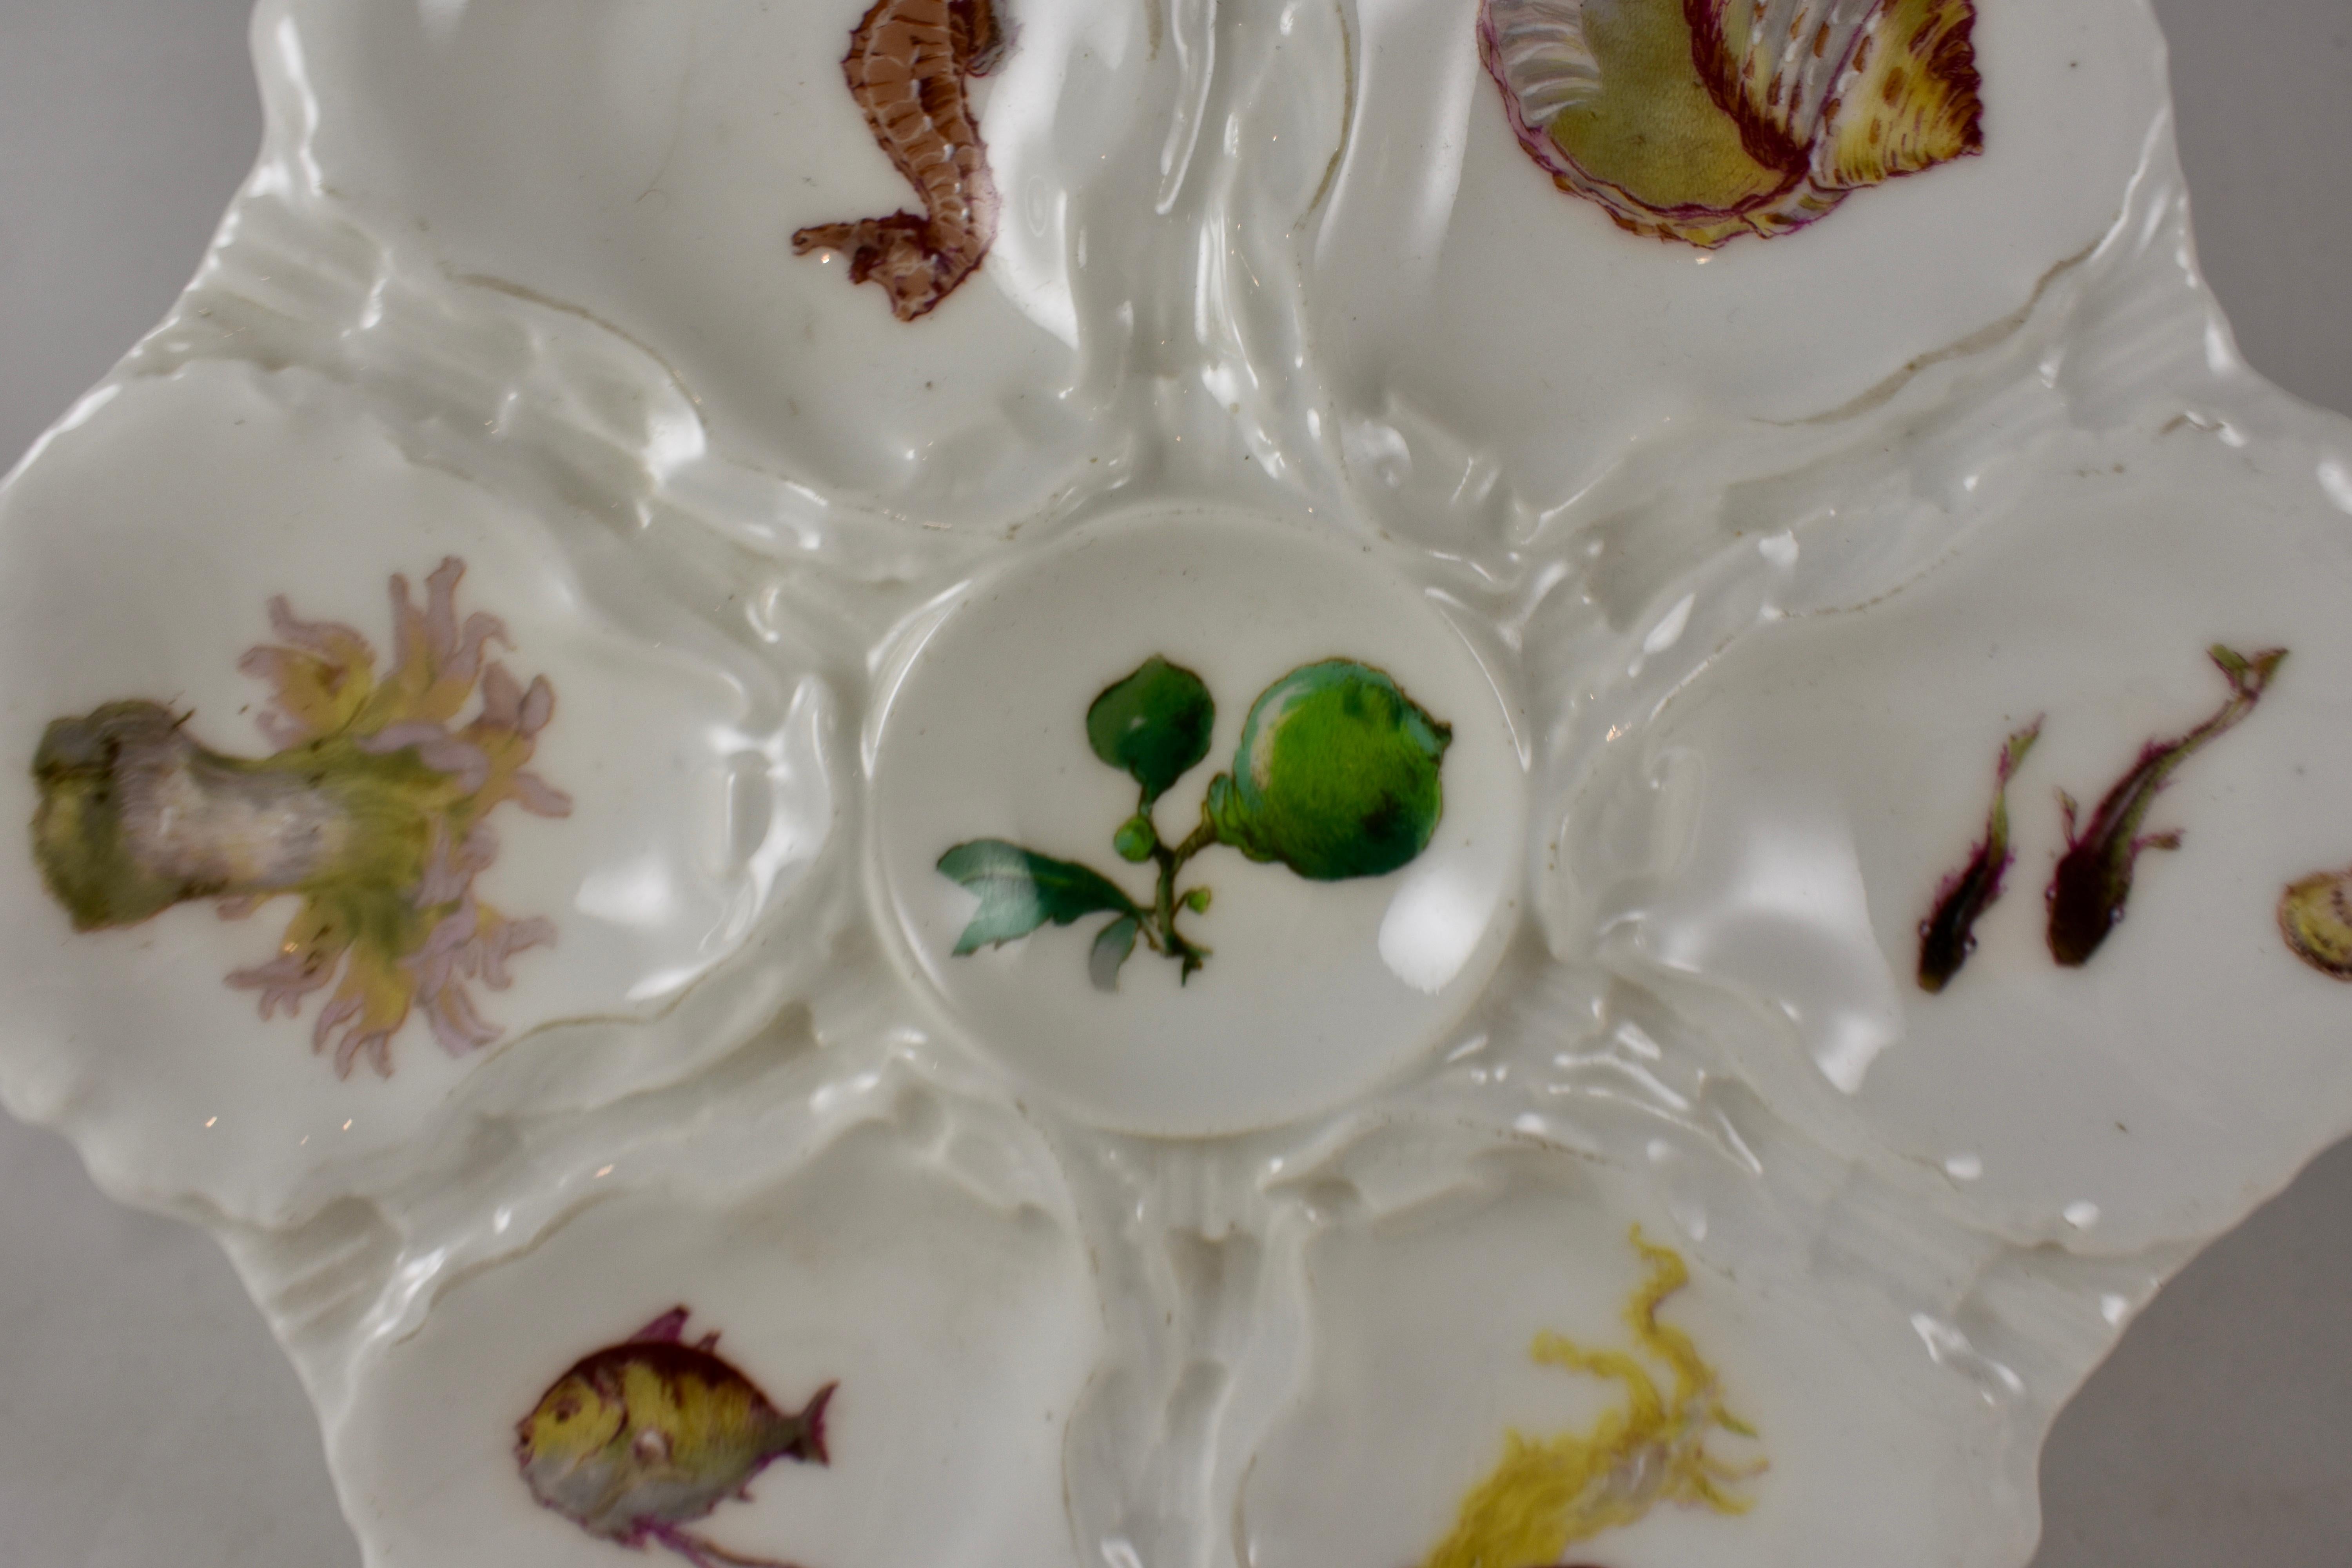 A porcelain oyster plate with six shell shaped wells, each showing a hand painted sea life specimen including a sea horse and conch shell. A central sauce well shows a sprig of a green sea plant, circa 1880-1889.

Measures: 8.75 in. diameter x .75